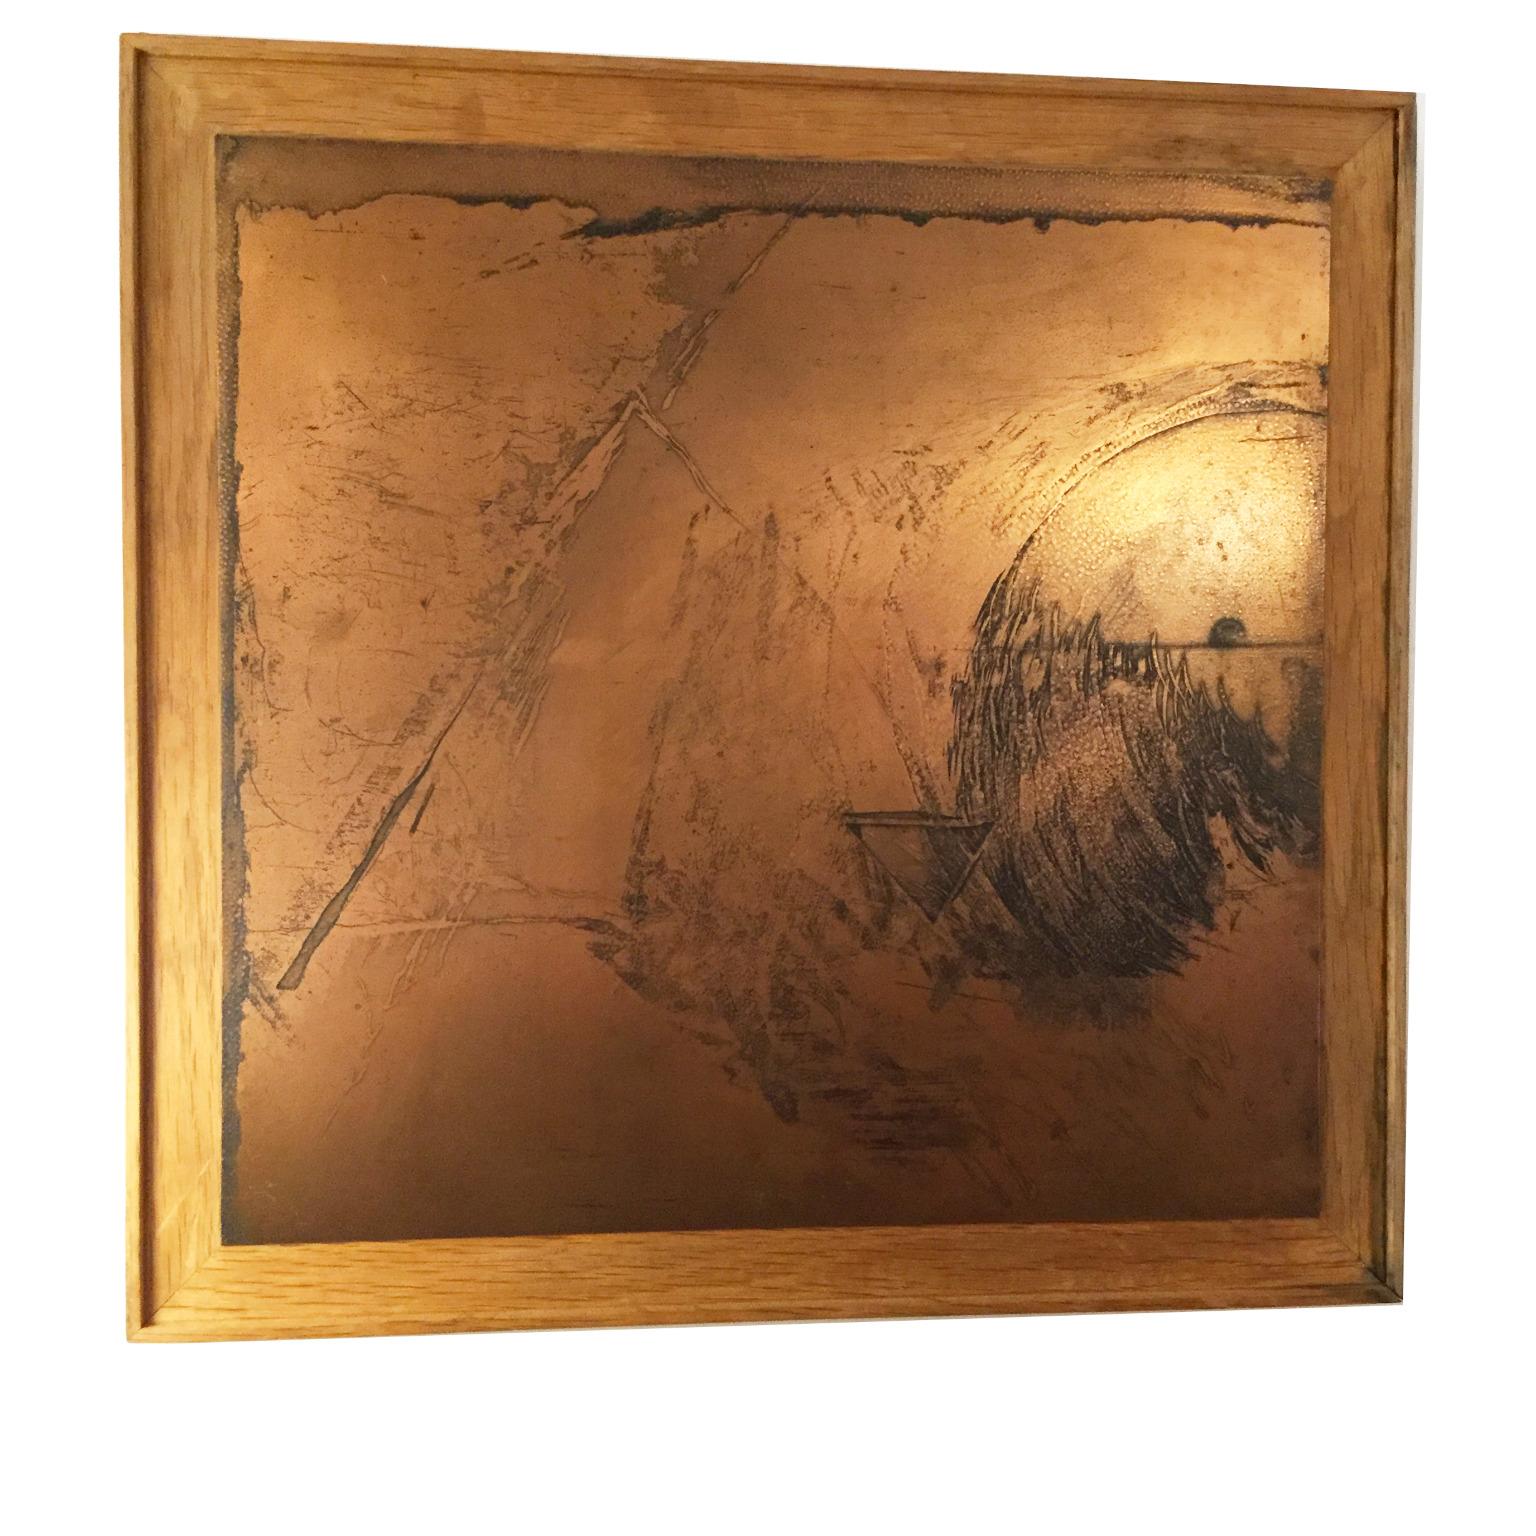 copper engraving plates